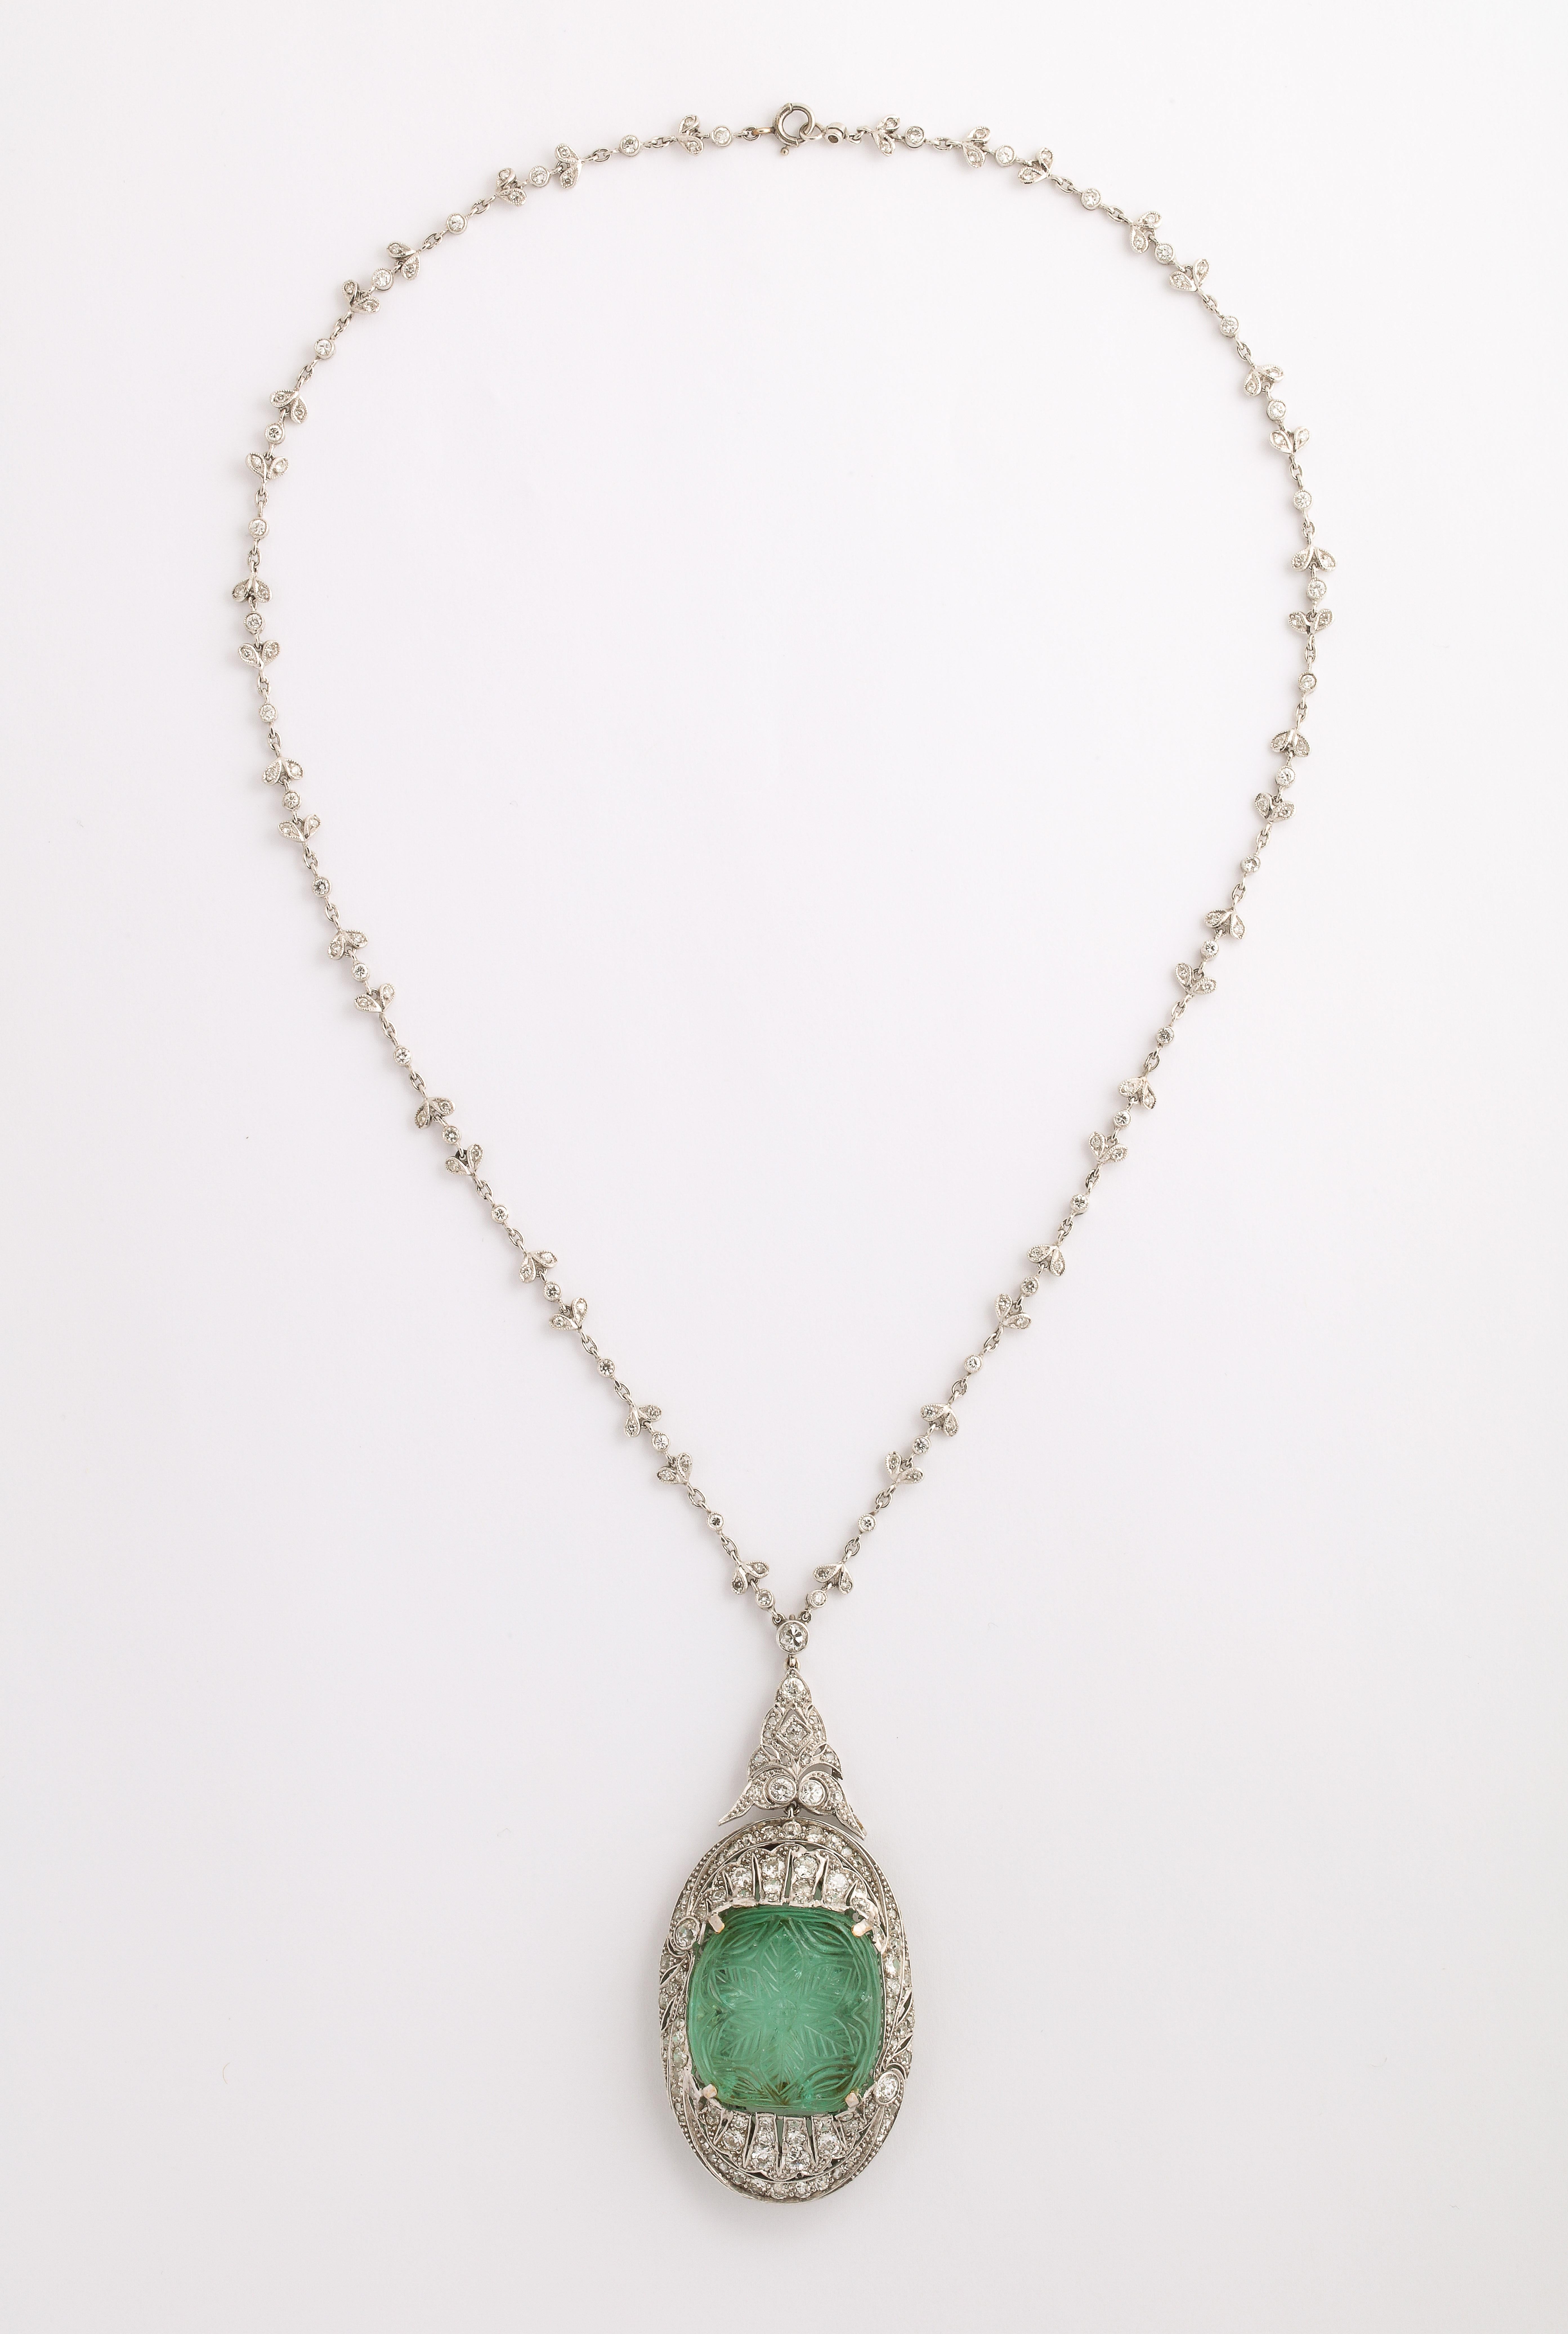 Art Deco Carved Mughal Style Emerald and Diamond Necklace
Measurements: Chain: 18